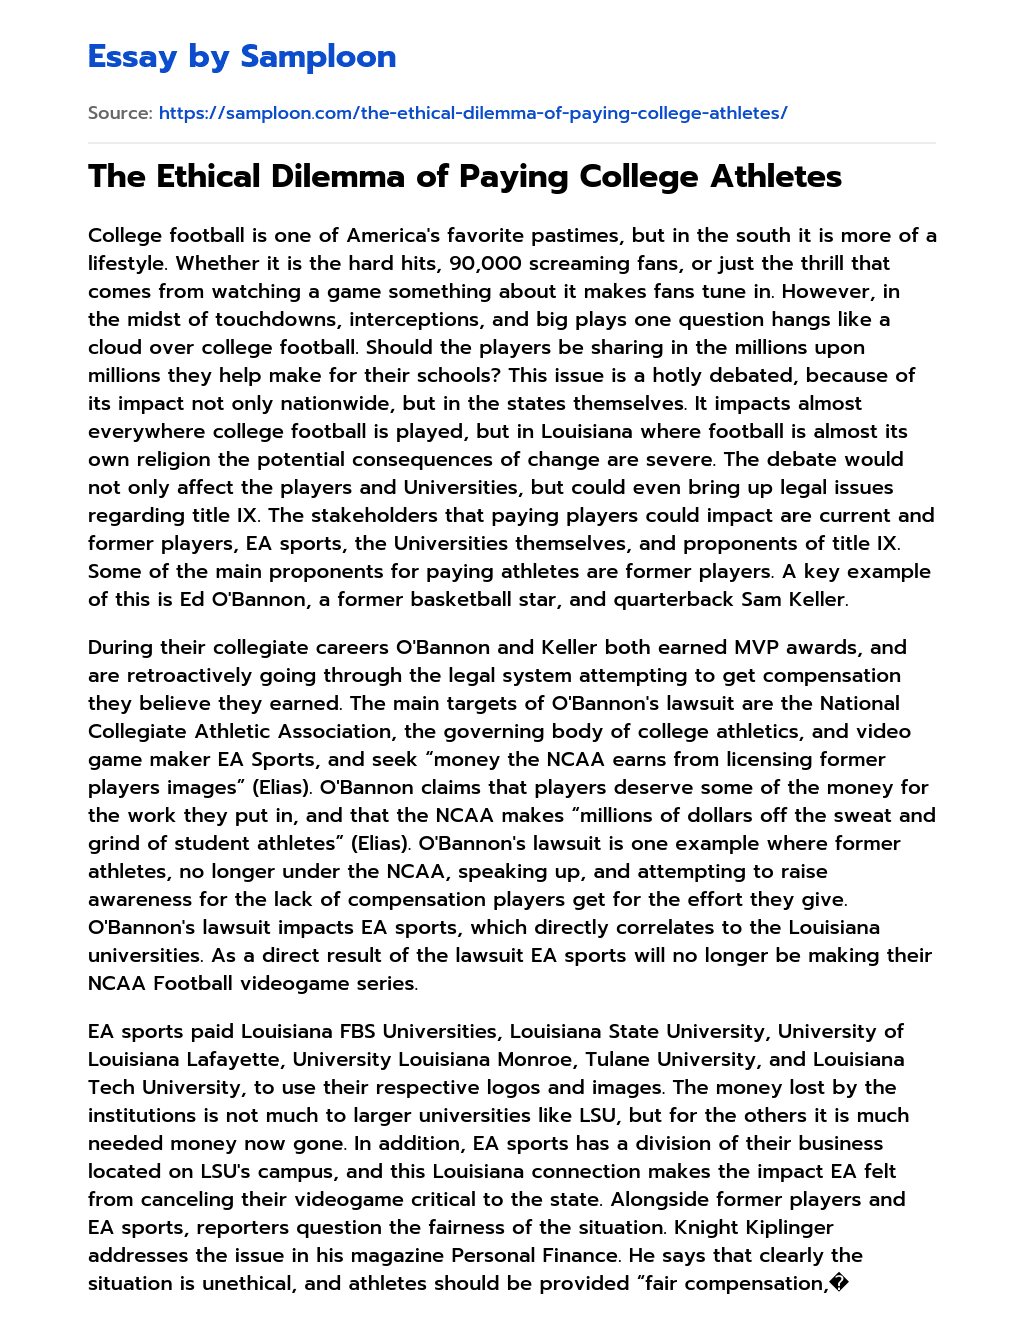 The Ethical Dilemma of Paying College Athletes essay